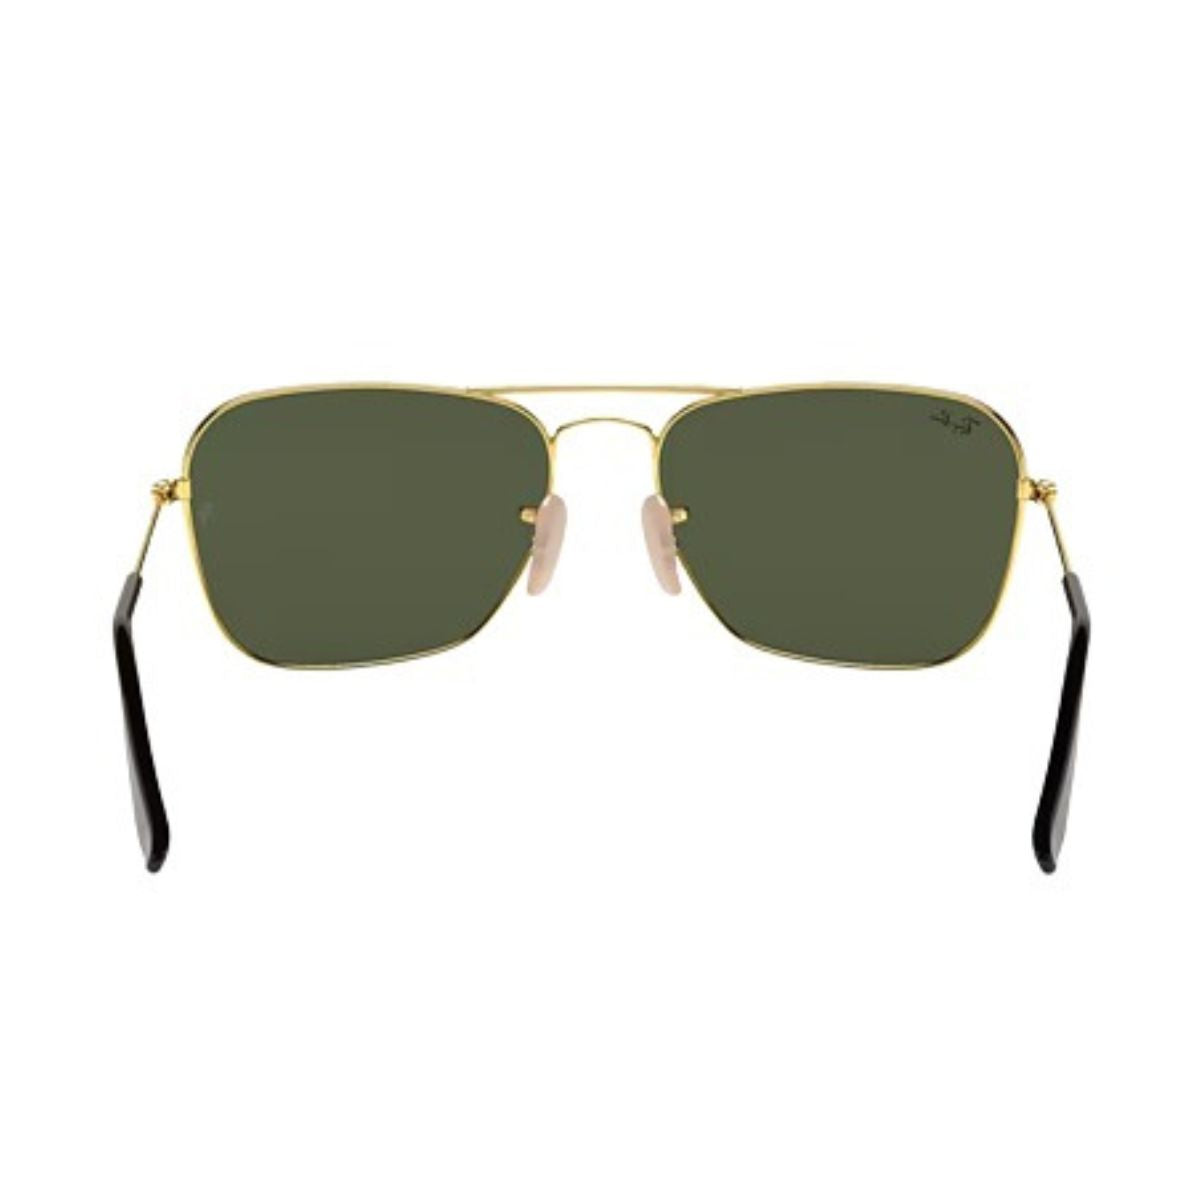 "Ray Ban 3136 001/58 Polarized Green Sunglass For Men's At Optorium"